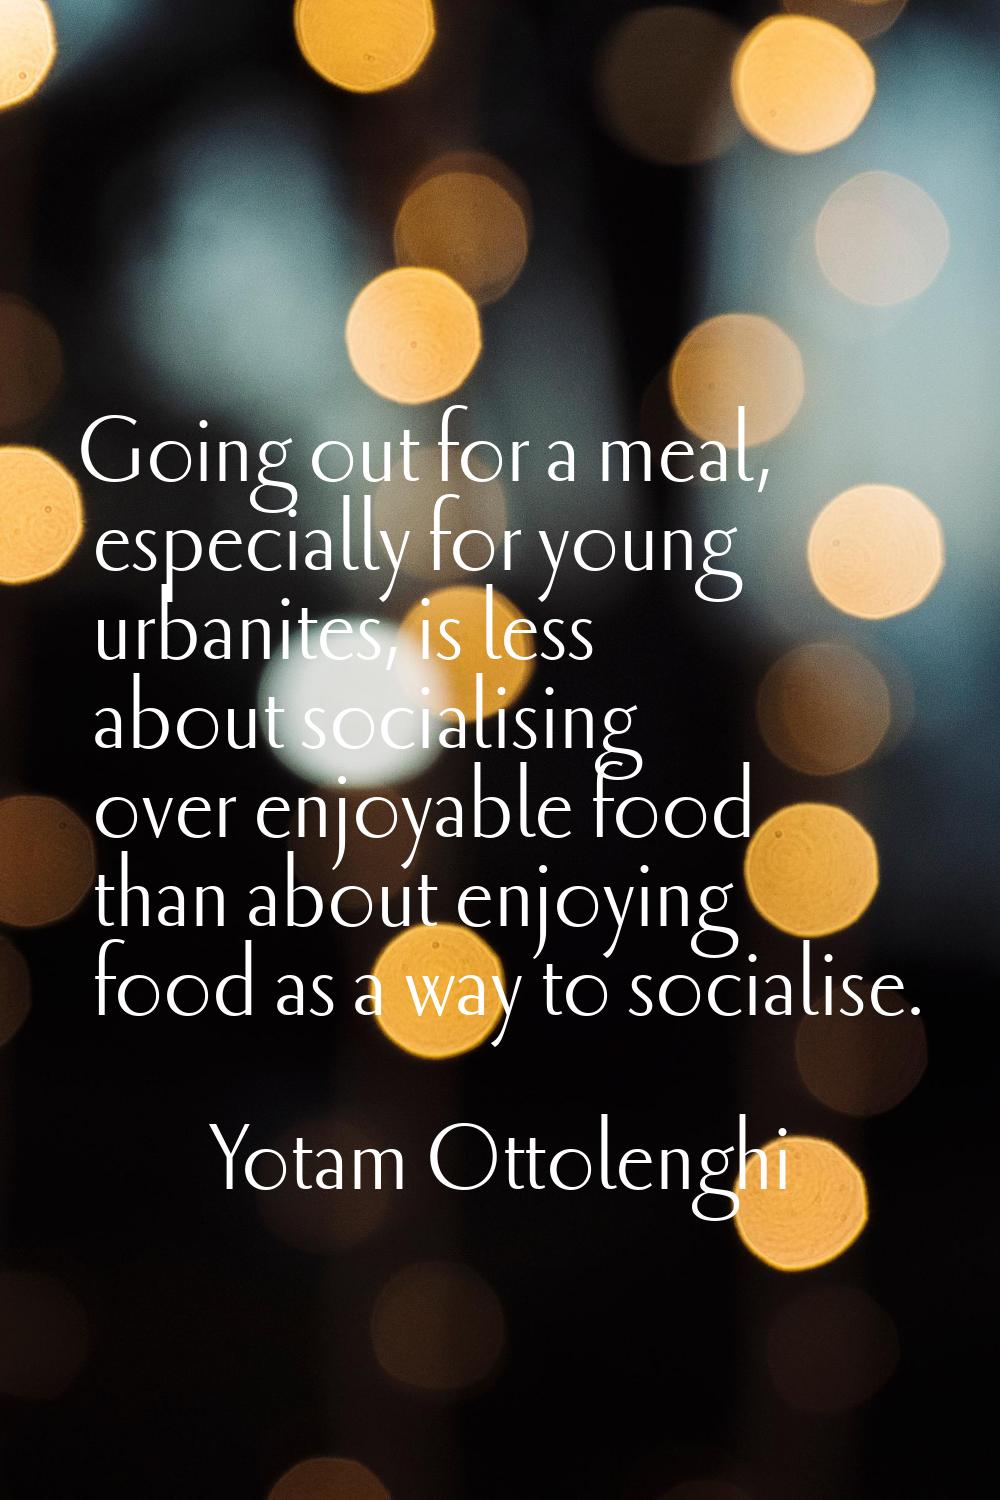 Going out for a meal, especially for young urbanites, is less about socialising over enjoyable food